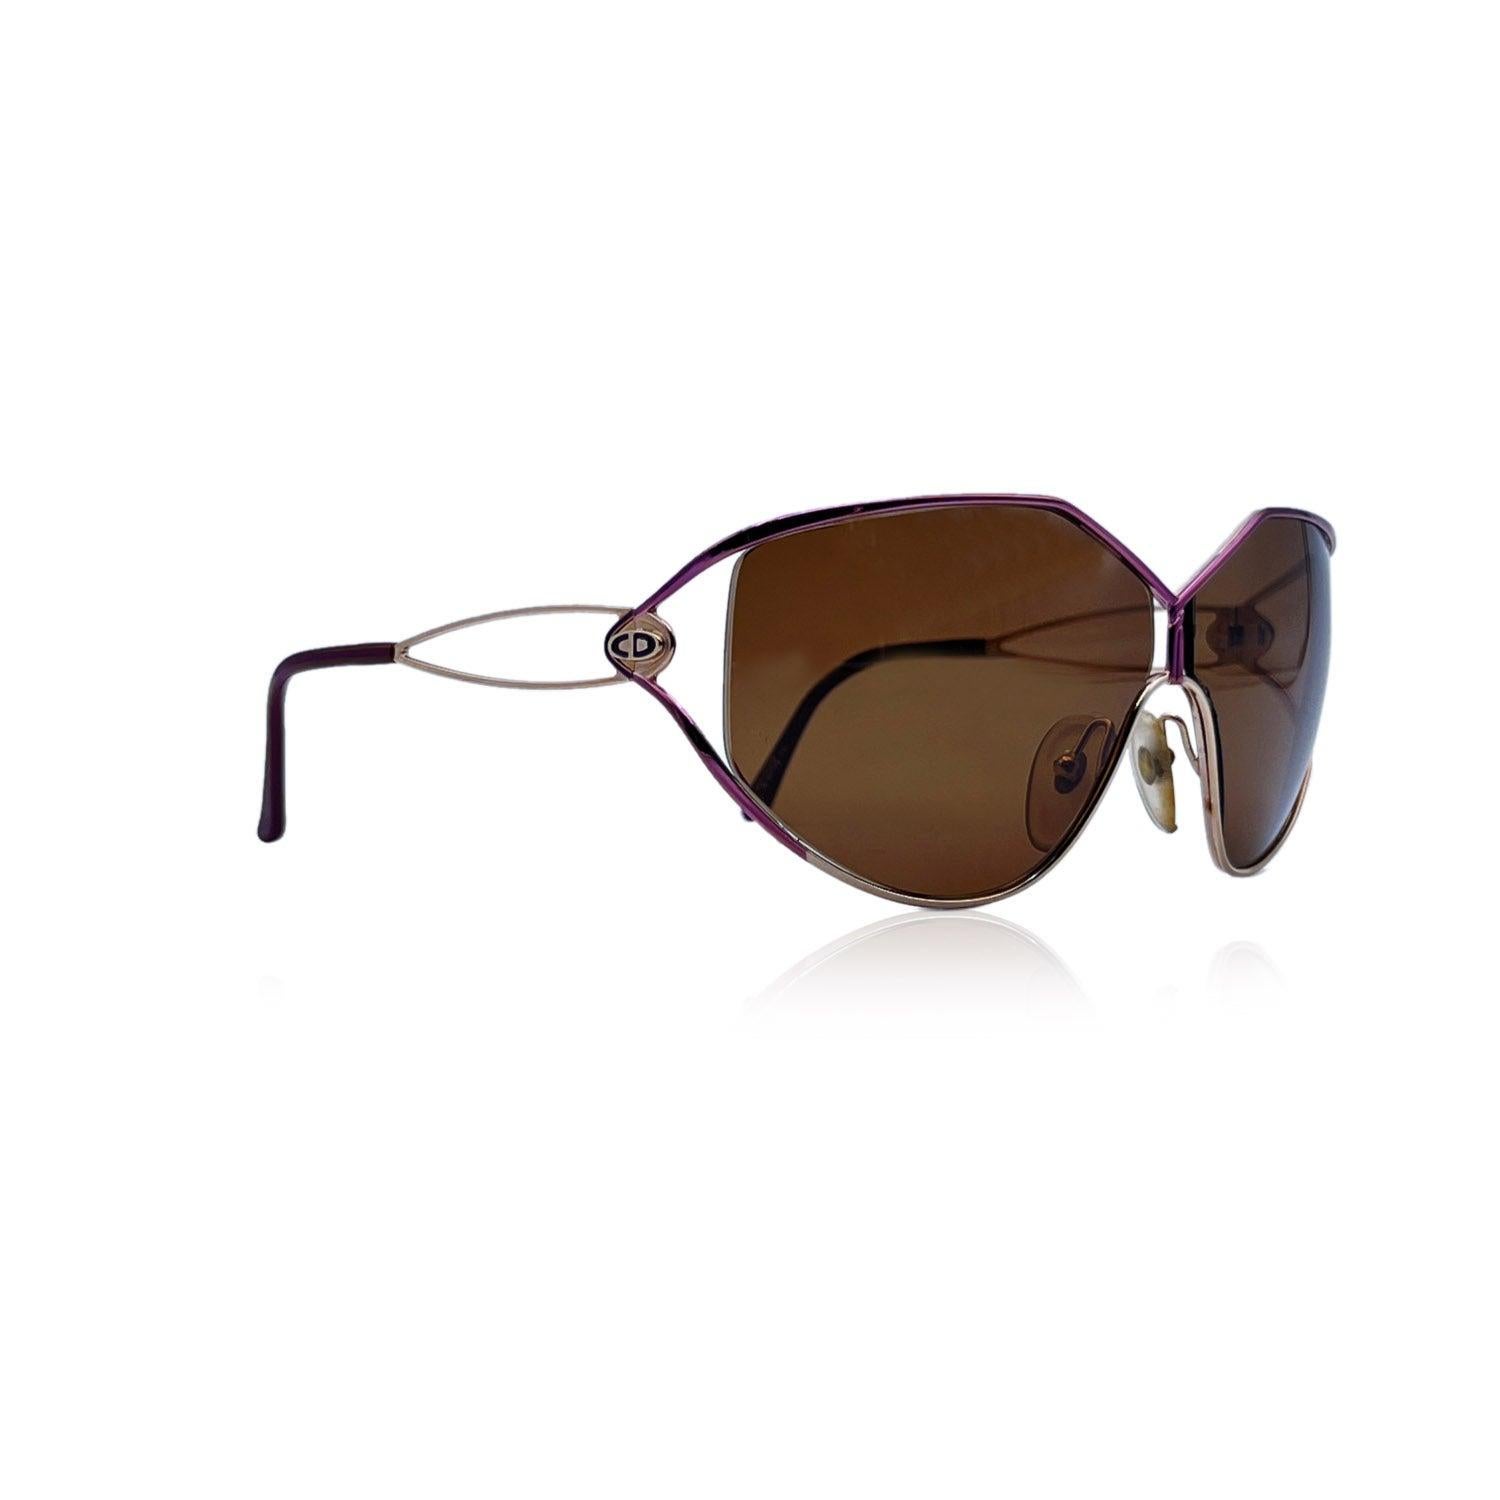 Christian Dior Vintage Sunglasses, Model 2345 - 48 - 64/08 115. Purple and gold metal frame. CD logo on temples. Brown lenses. Made in Austria. Details MATERIAL: Metal COLOR: Purple MODEL: 2345 - 48 GENDER: Women COUNTRY OF MANUFACTURE: Austria